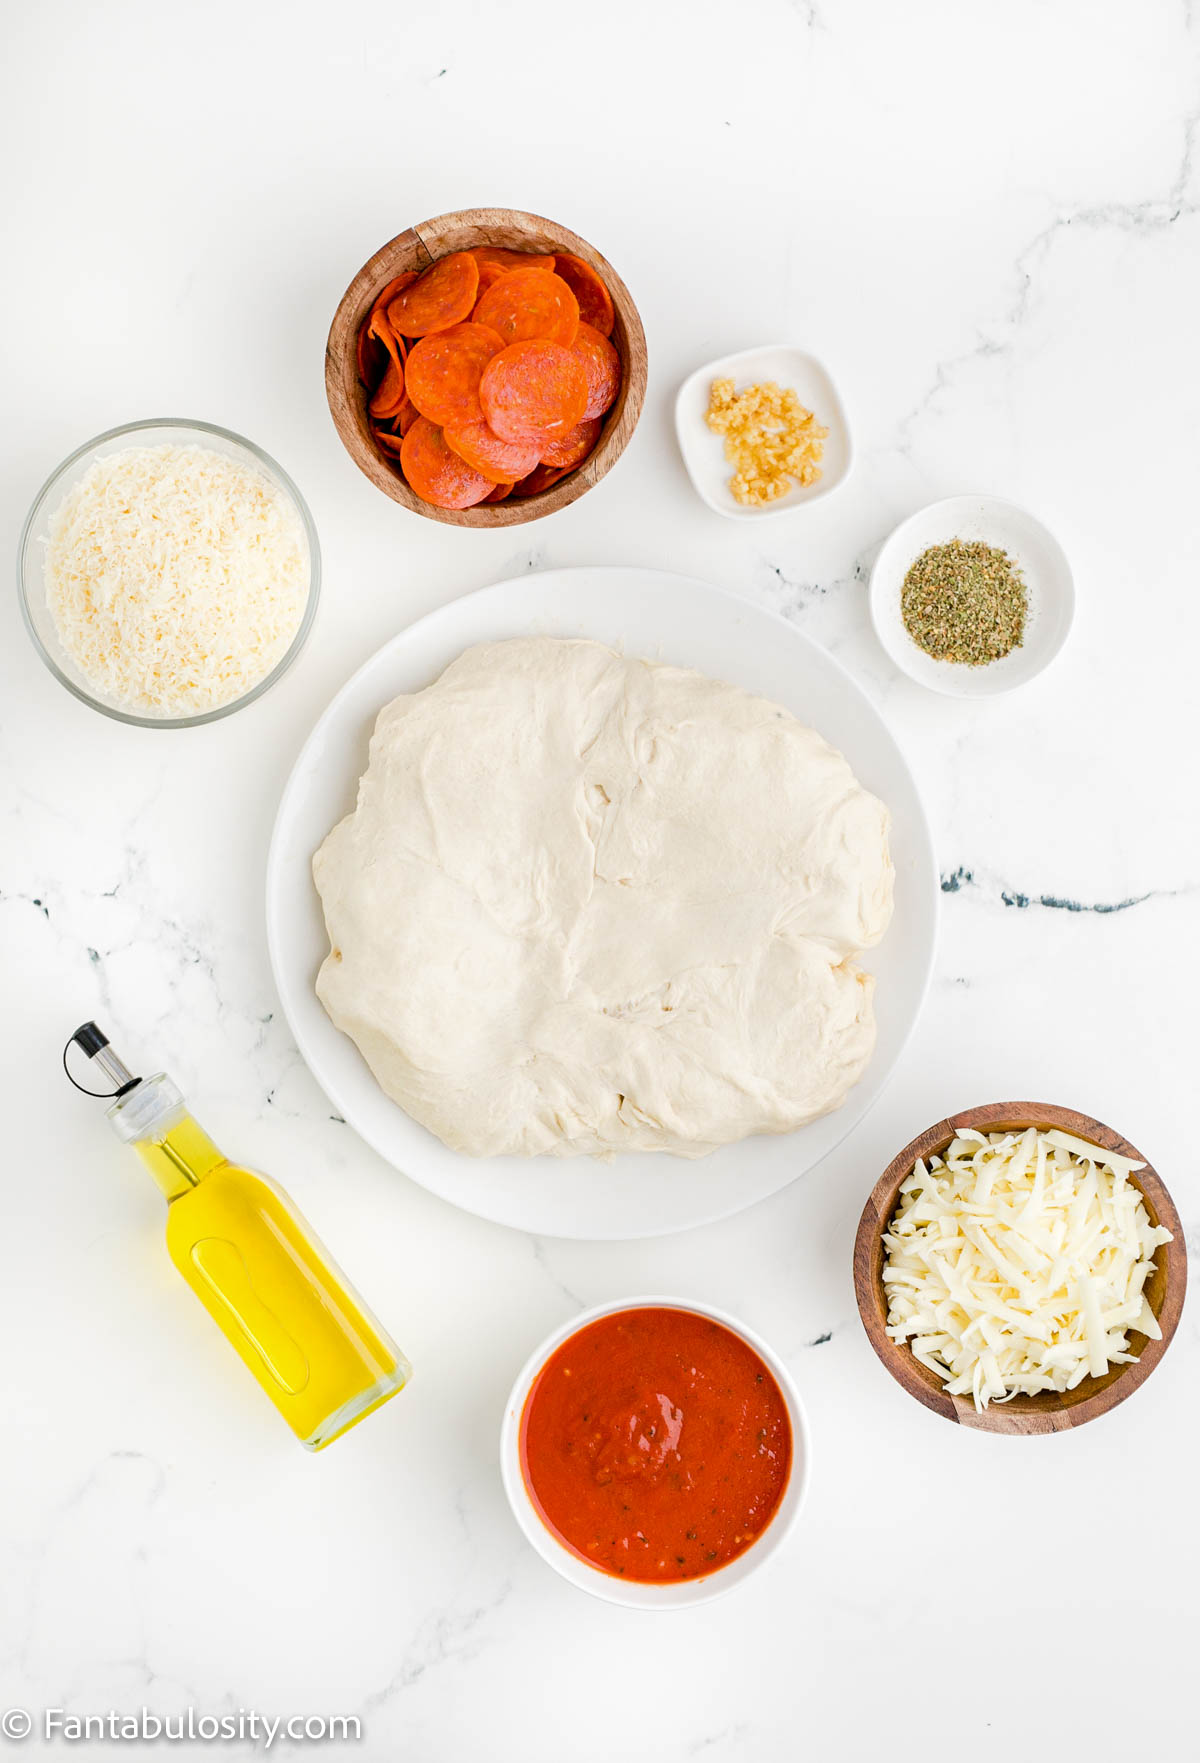 Ingredients on table for pizza bread